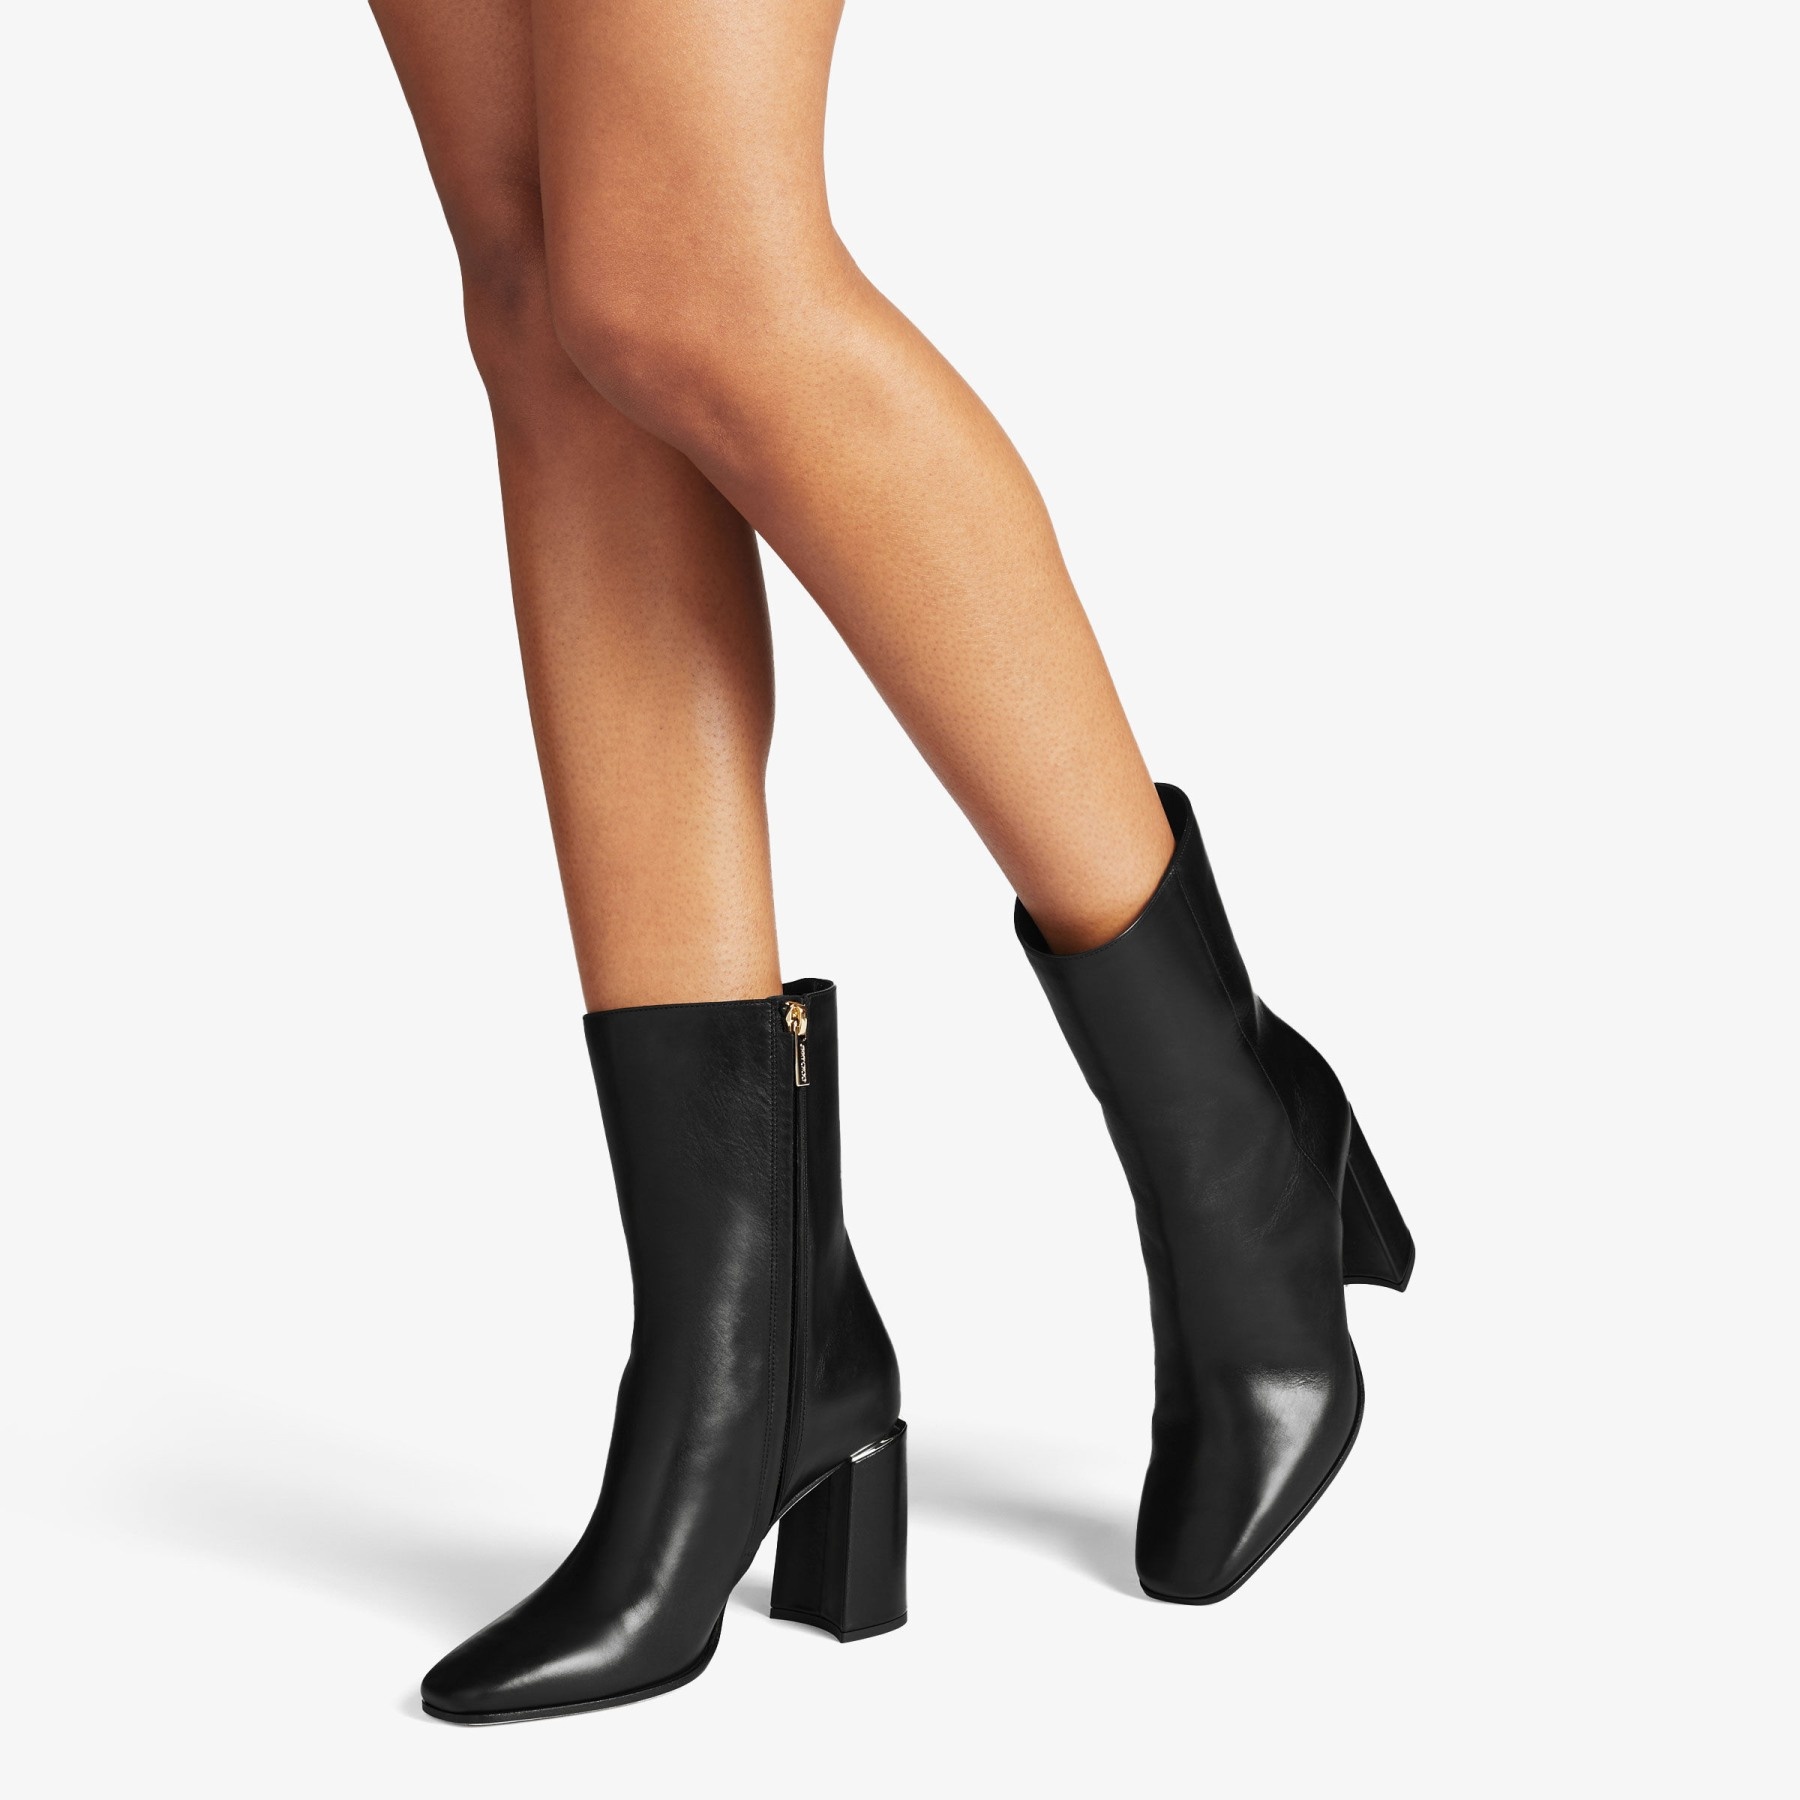 Loren Ankle Boot 85
Black Calf Leather Ankle Boots - 2